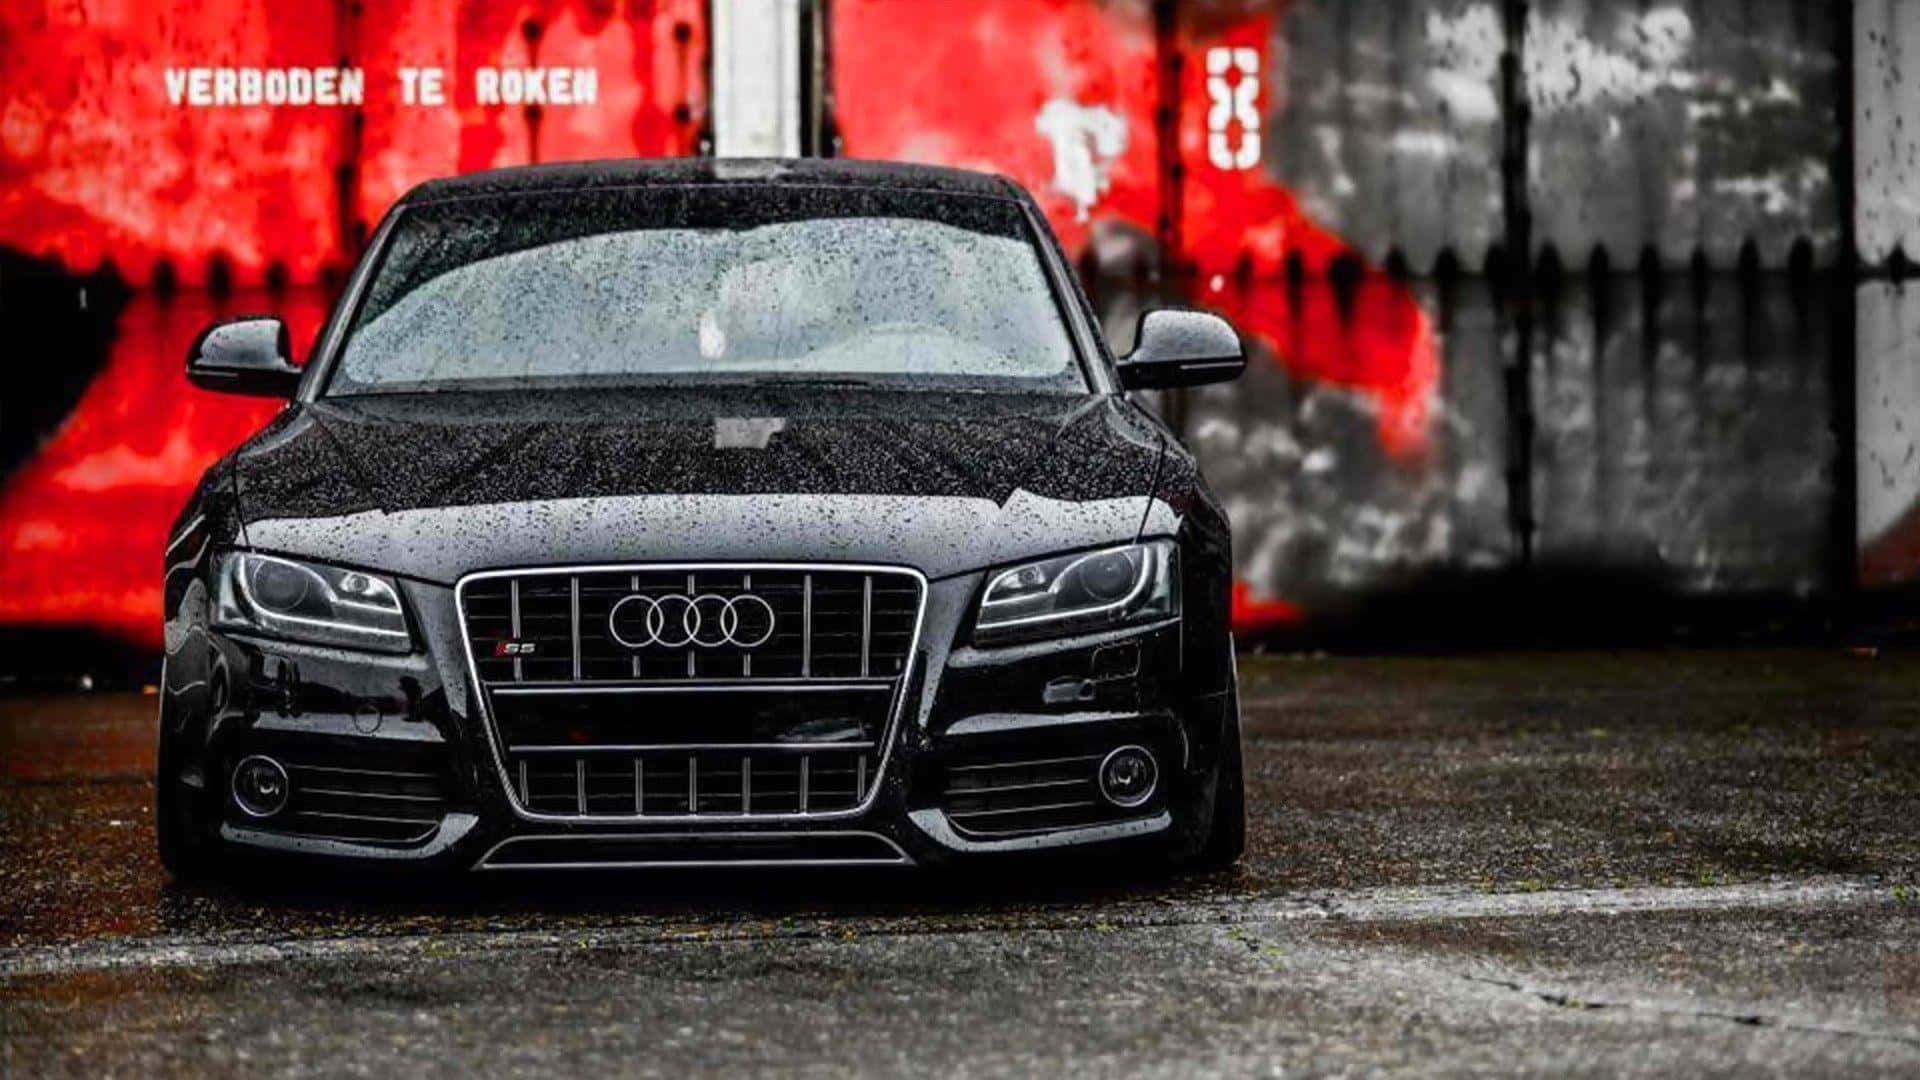 Audi S5 Sports Coupe with Dramatic Scenery Wallpaper